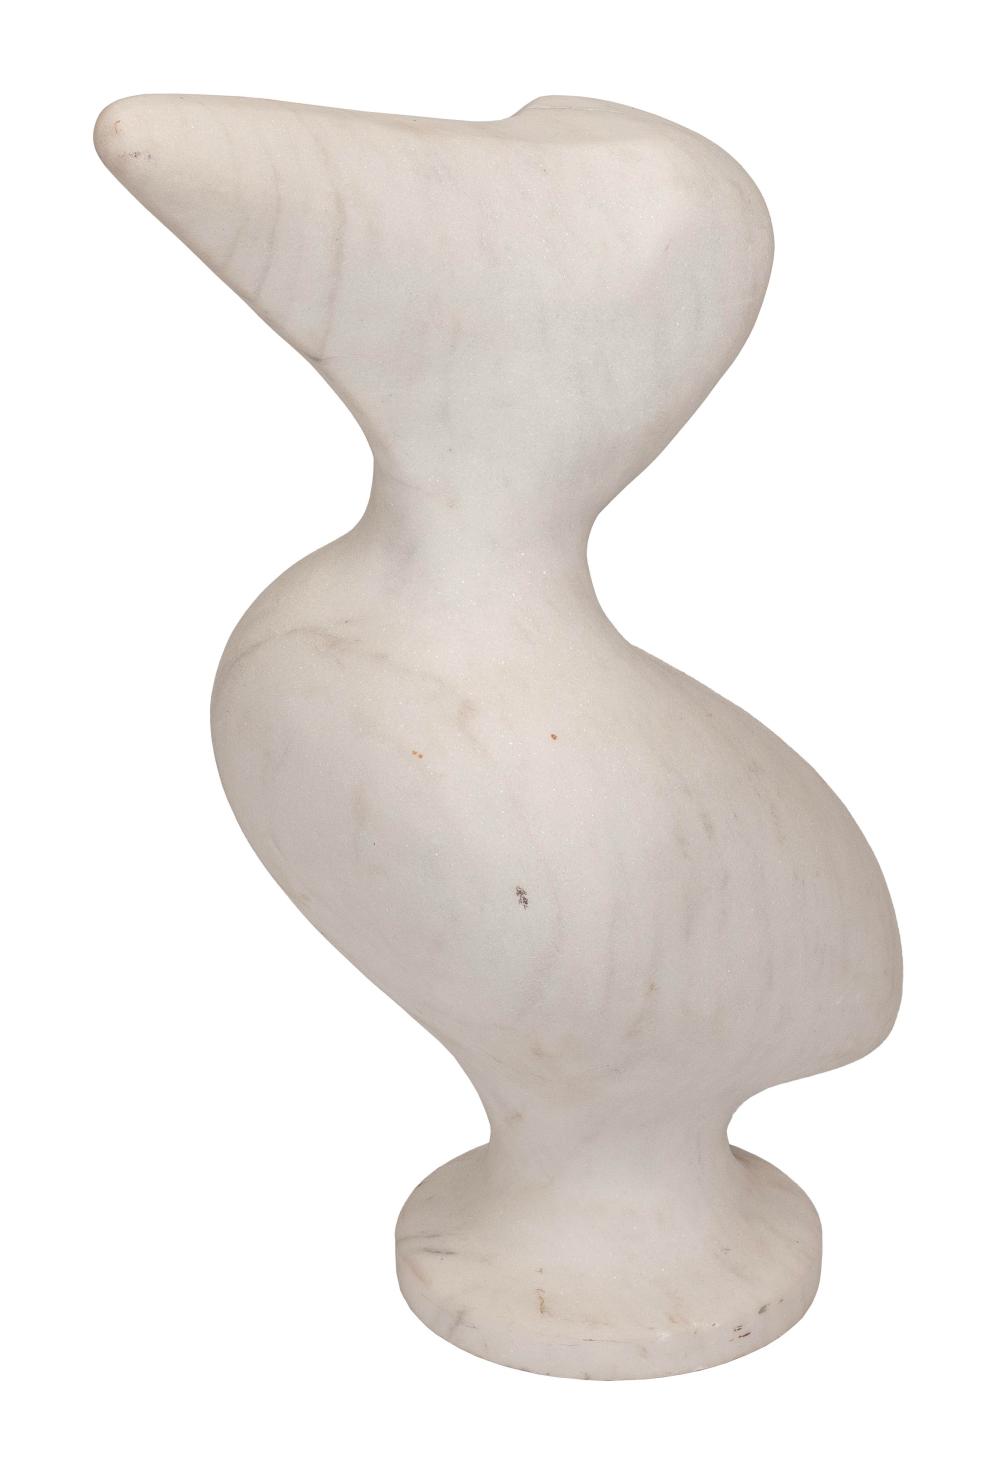 SOLID MARBLE CARVING OF A DUCK 2f1c99